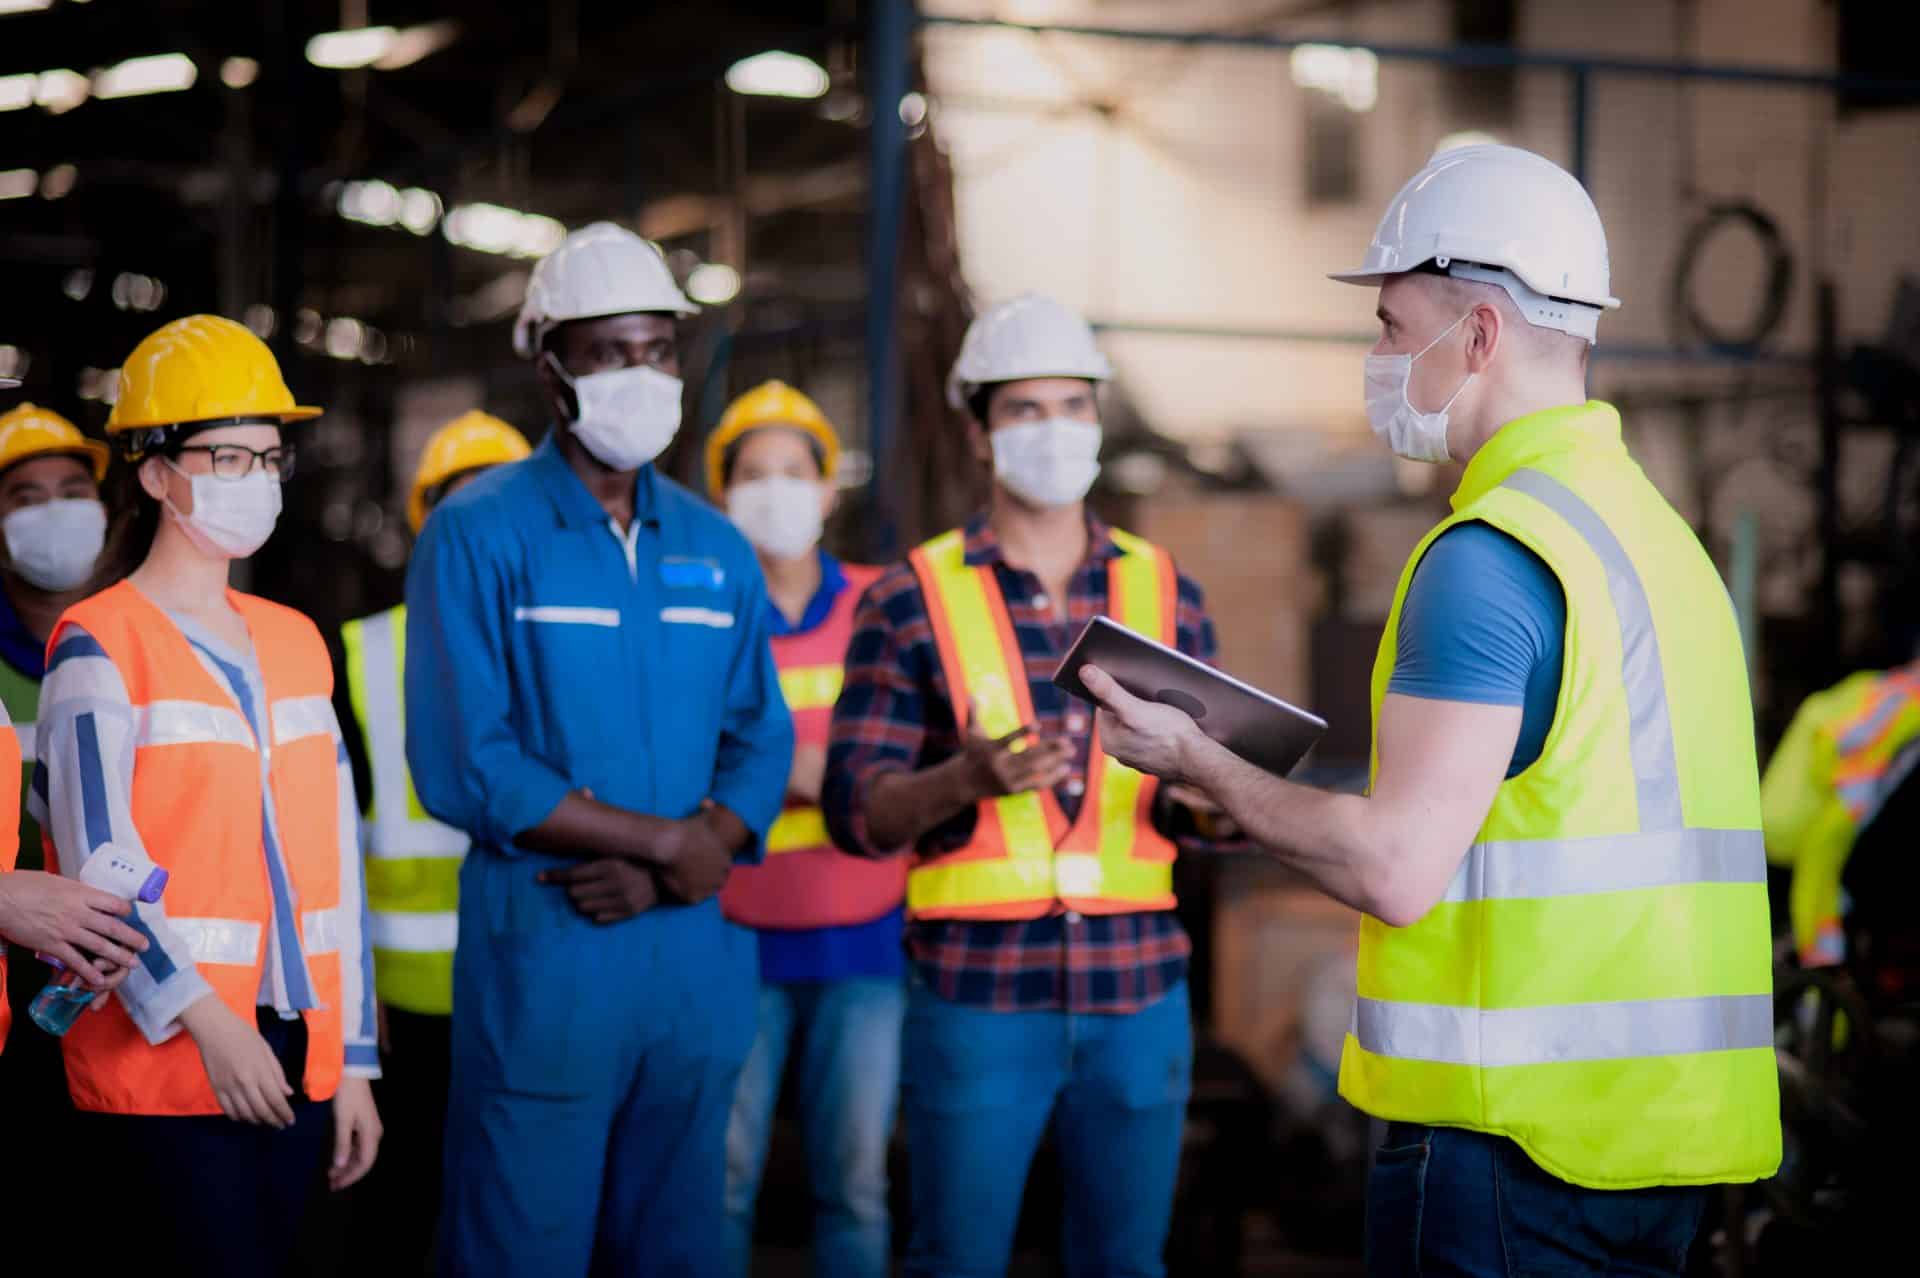 The Importance of Visible Clothing for Workplace Safety